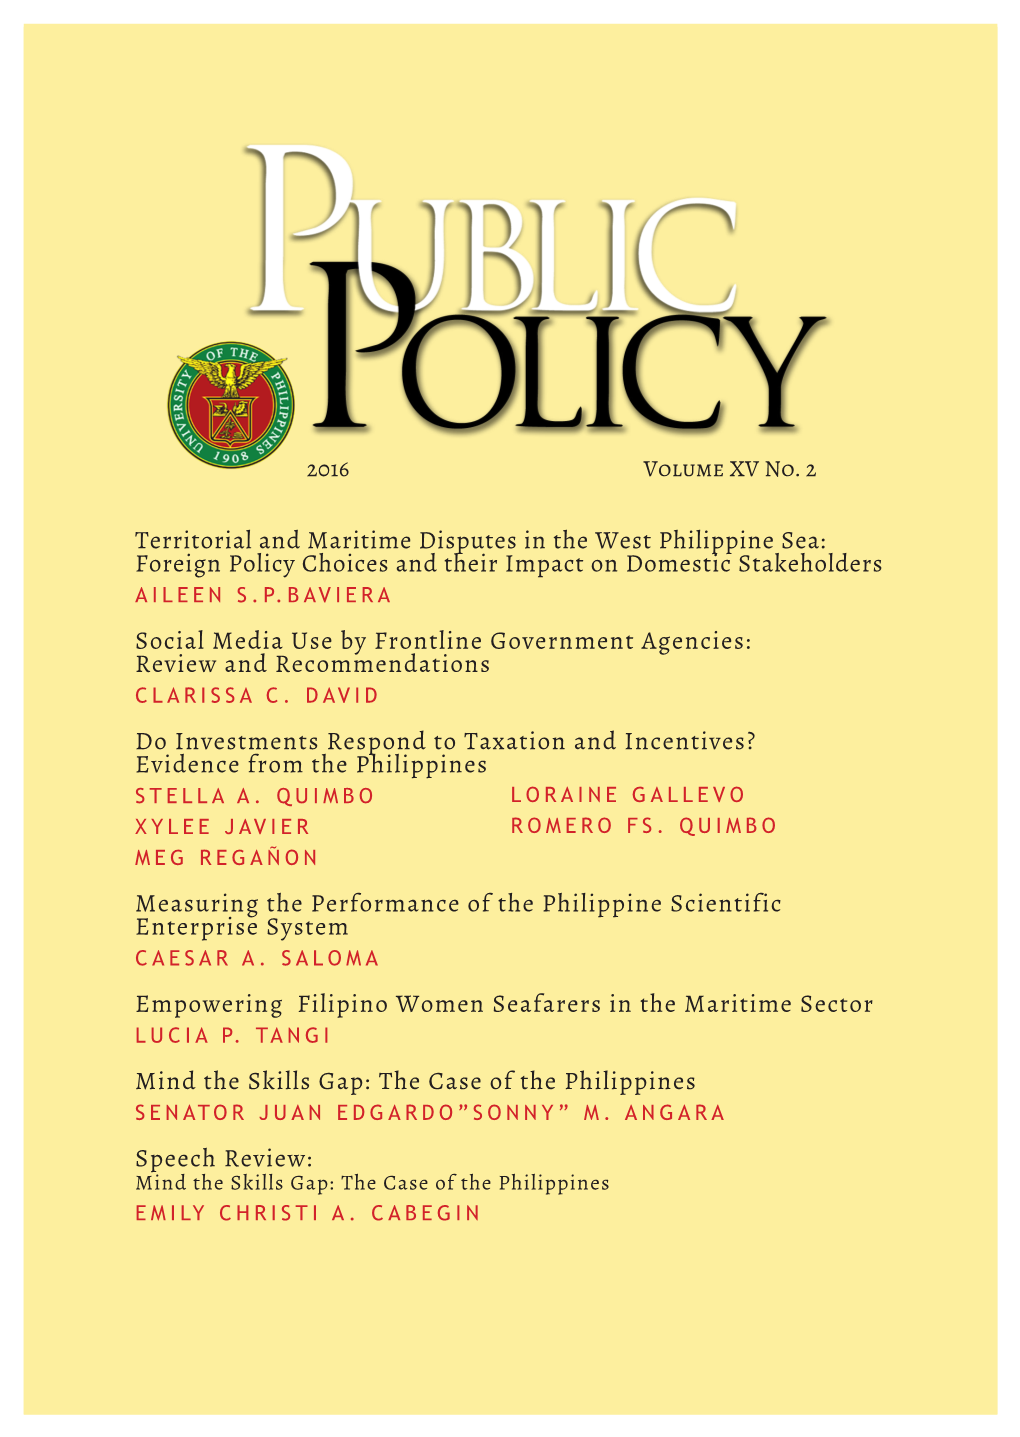 Territorial and Maritime Disputes in the West Philippine Sea: Foreign Policy Choices and Their Impact on Domestic Stakeholders S